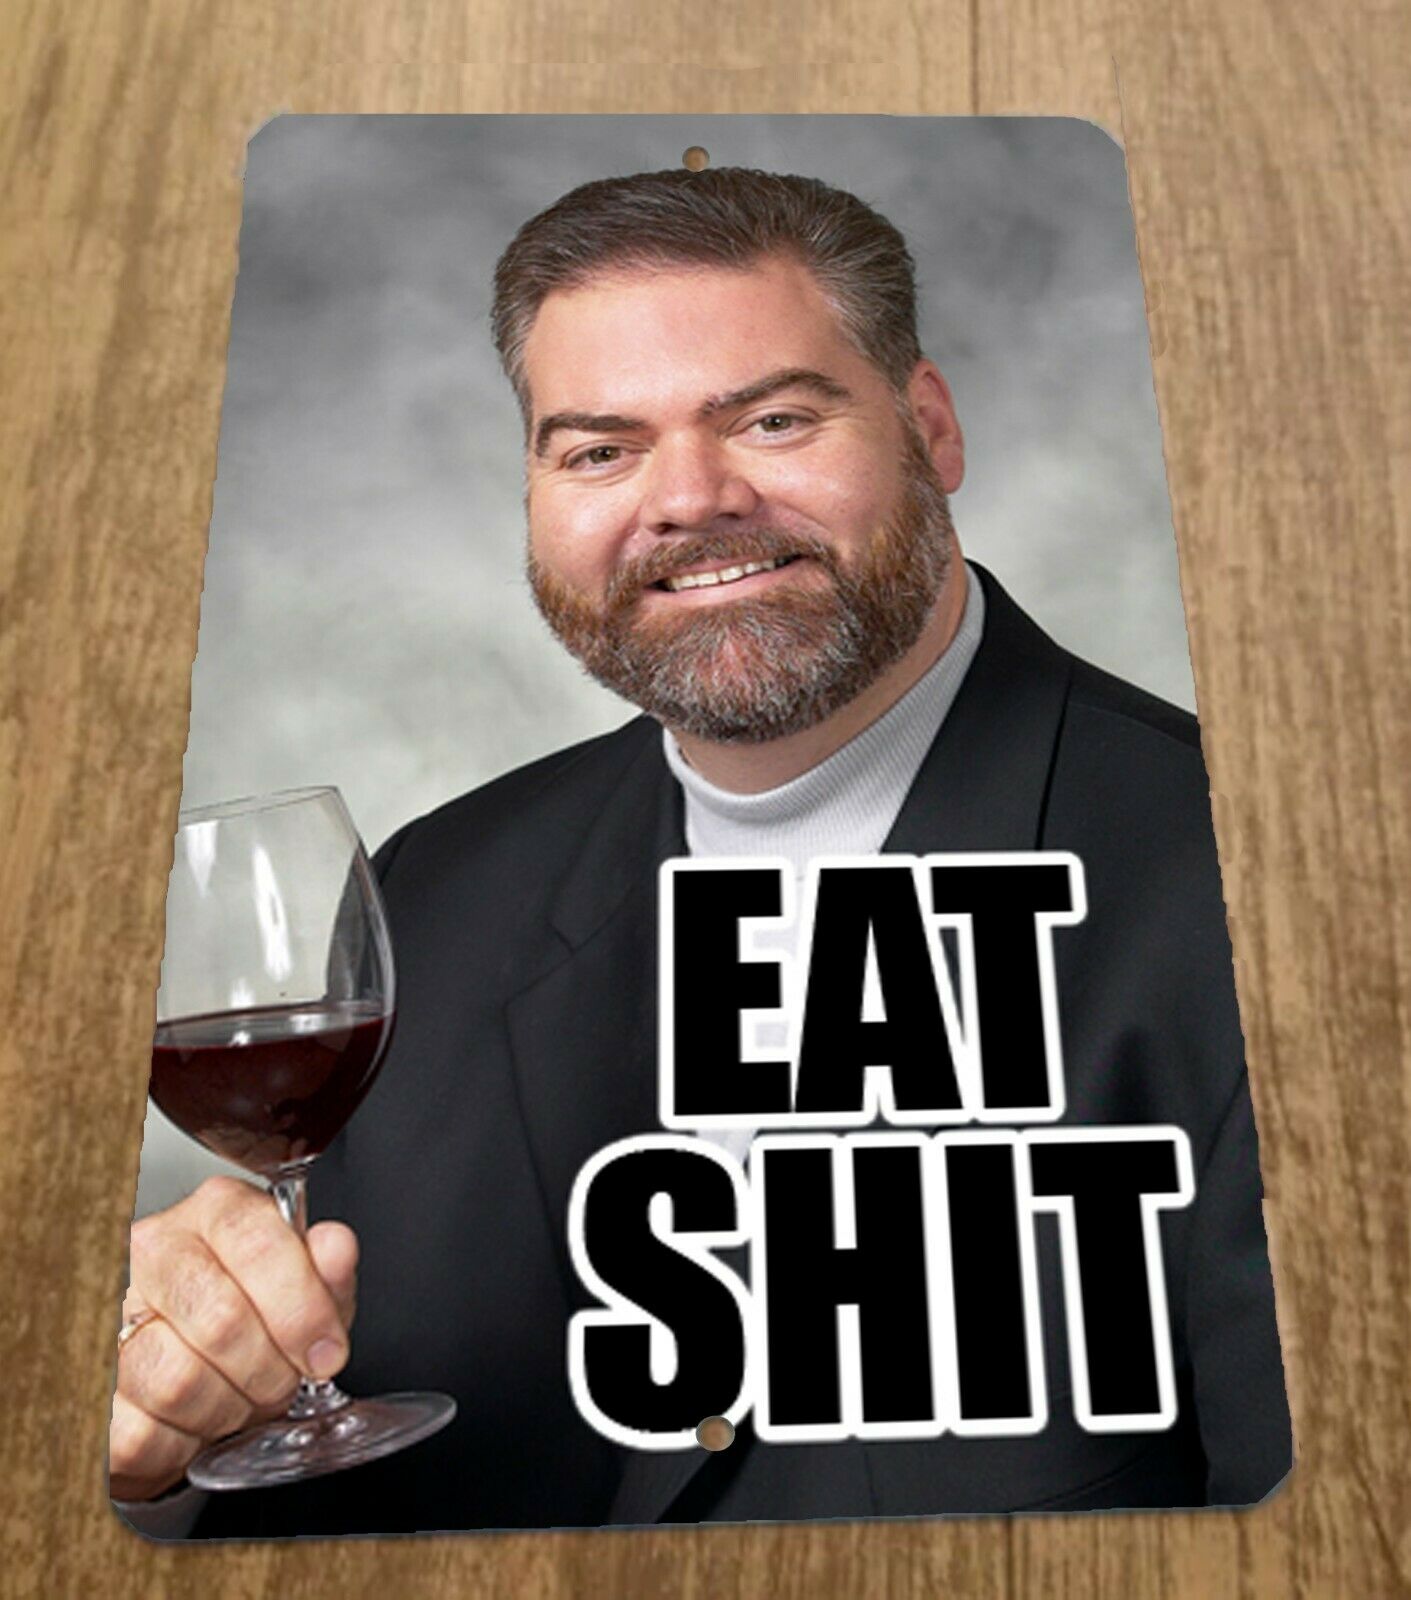 Eat Shit 8x12 Metal Wall Funny Quote Sign